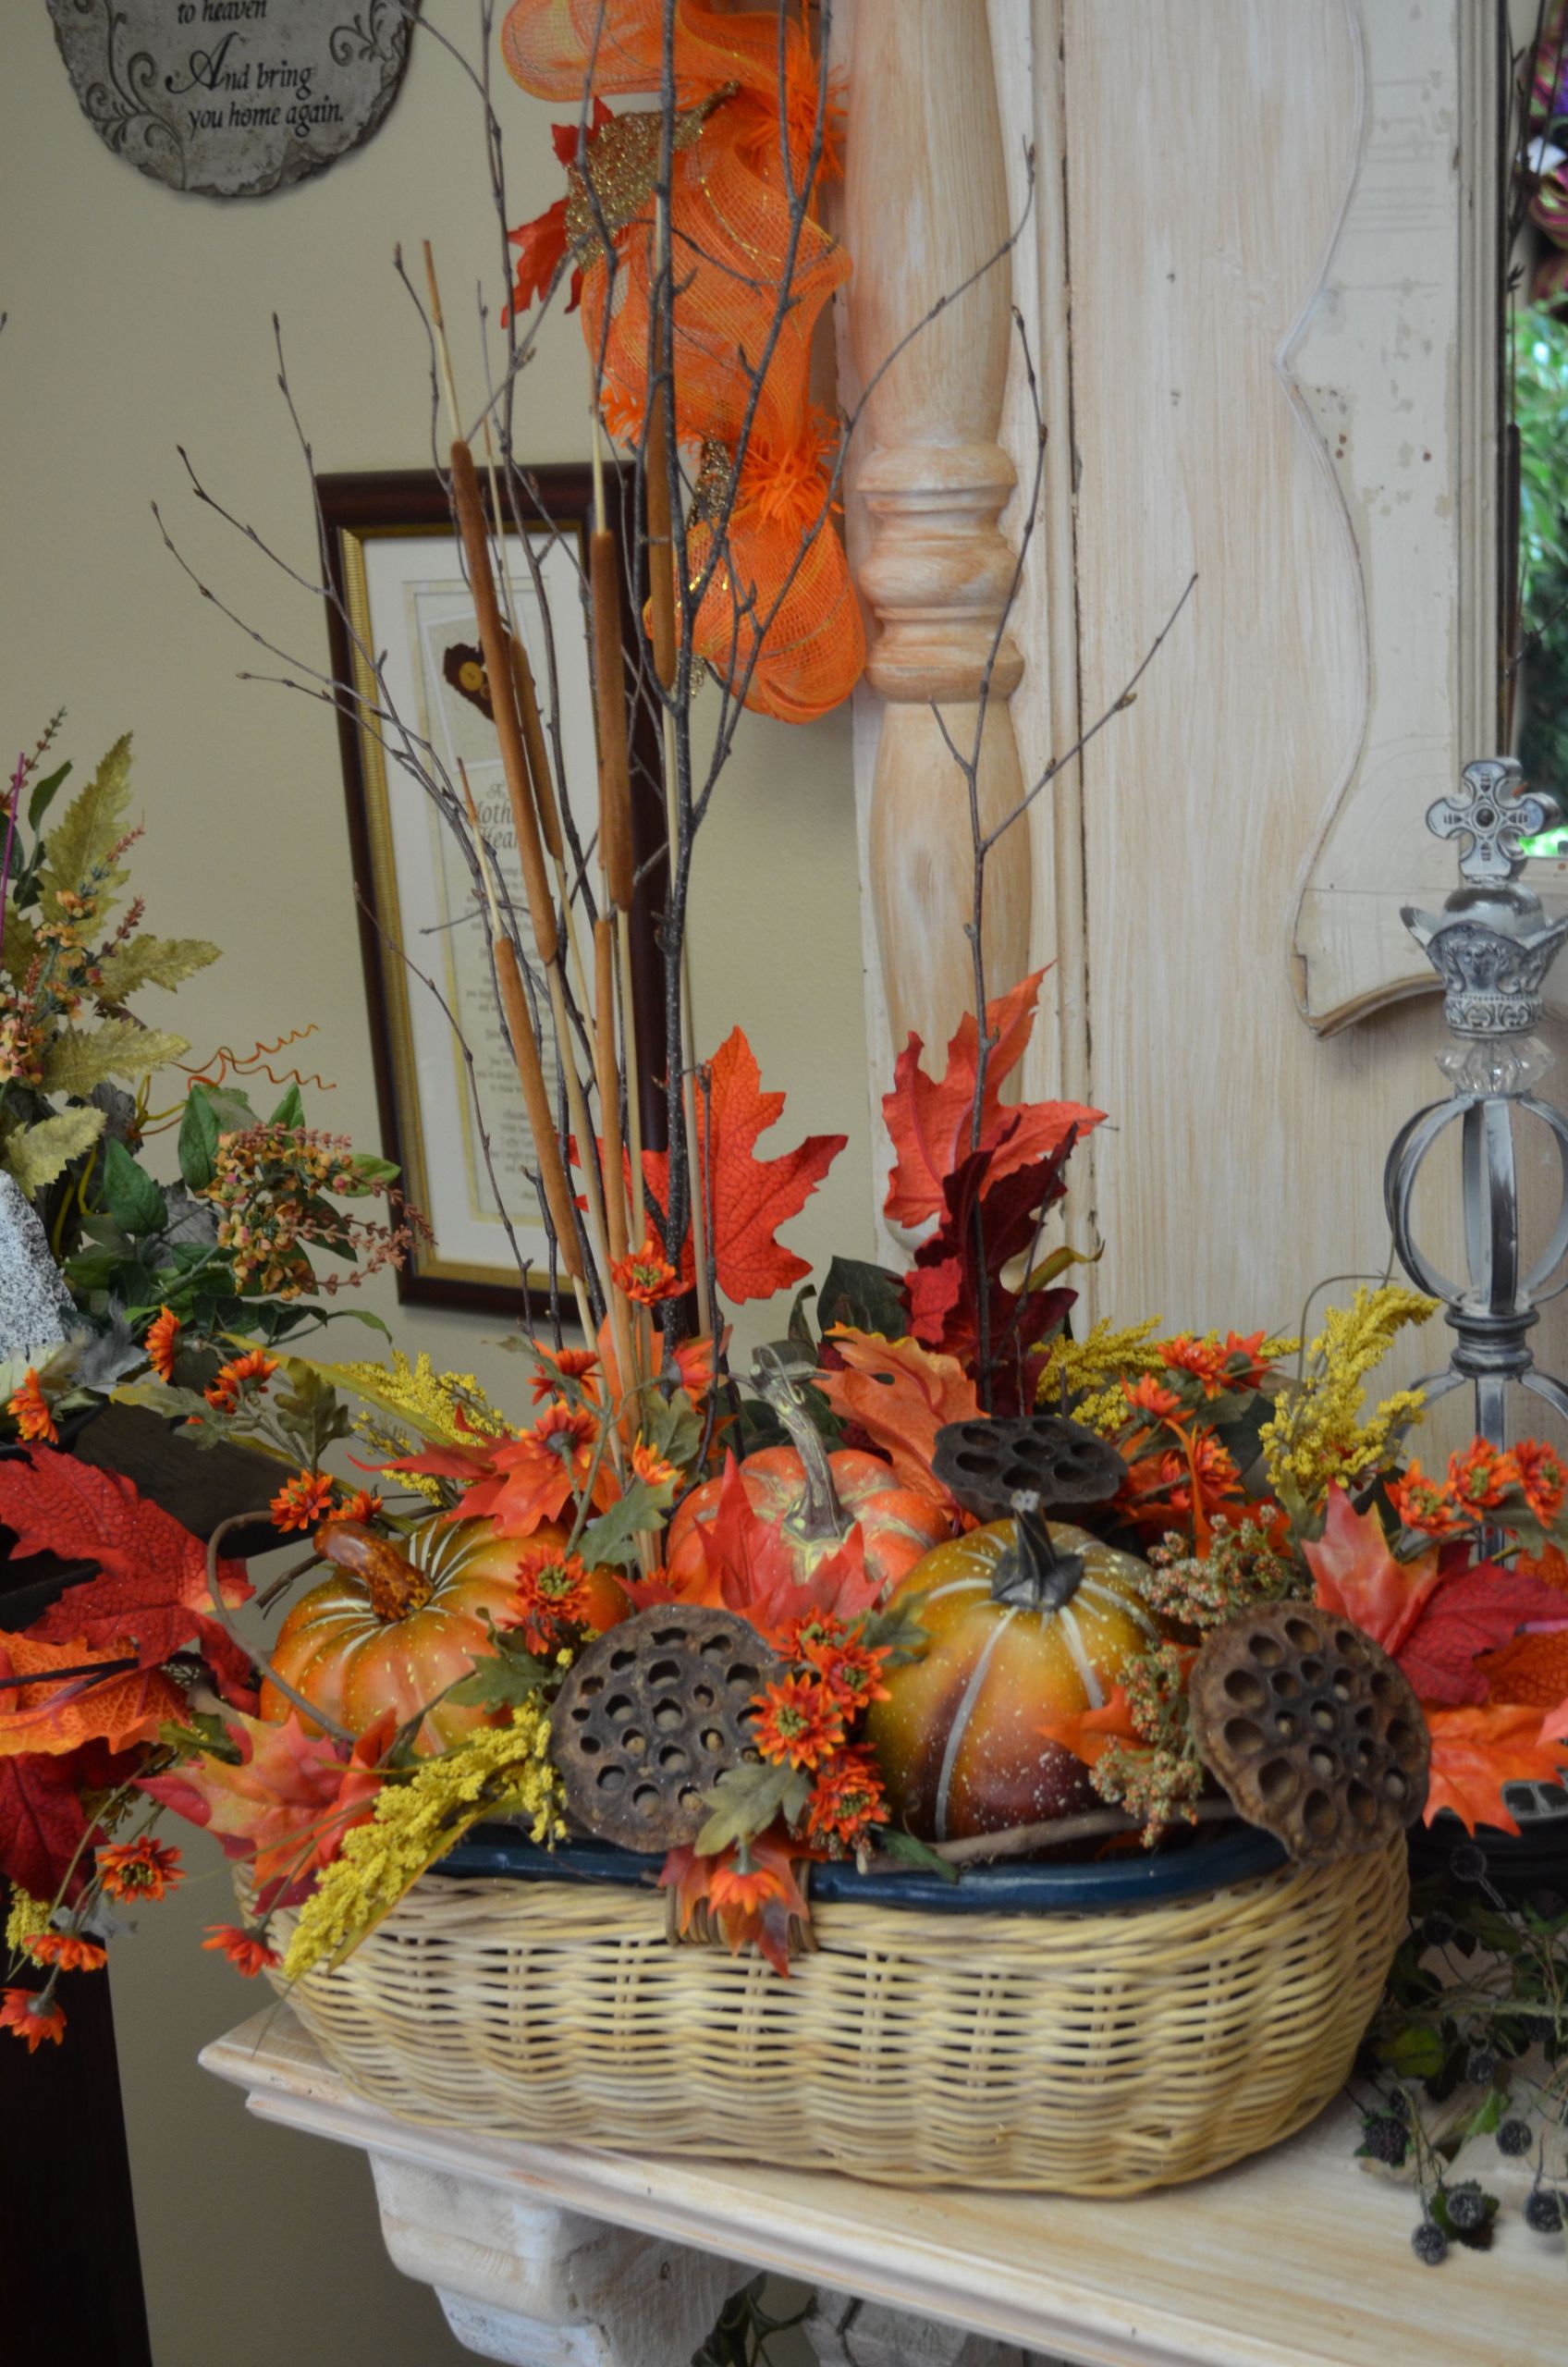 Gift Basket Decoration Ideas
 Fall Basket designed at Sarah s Flowers & Gifts Manchester